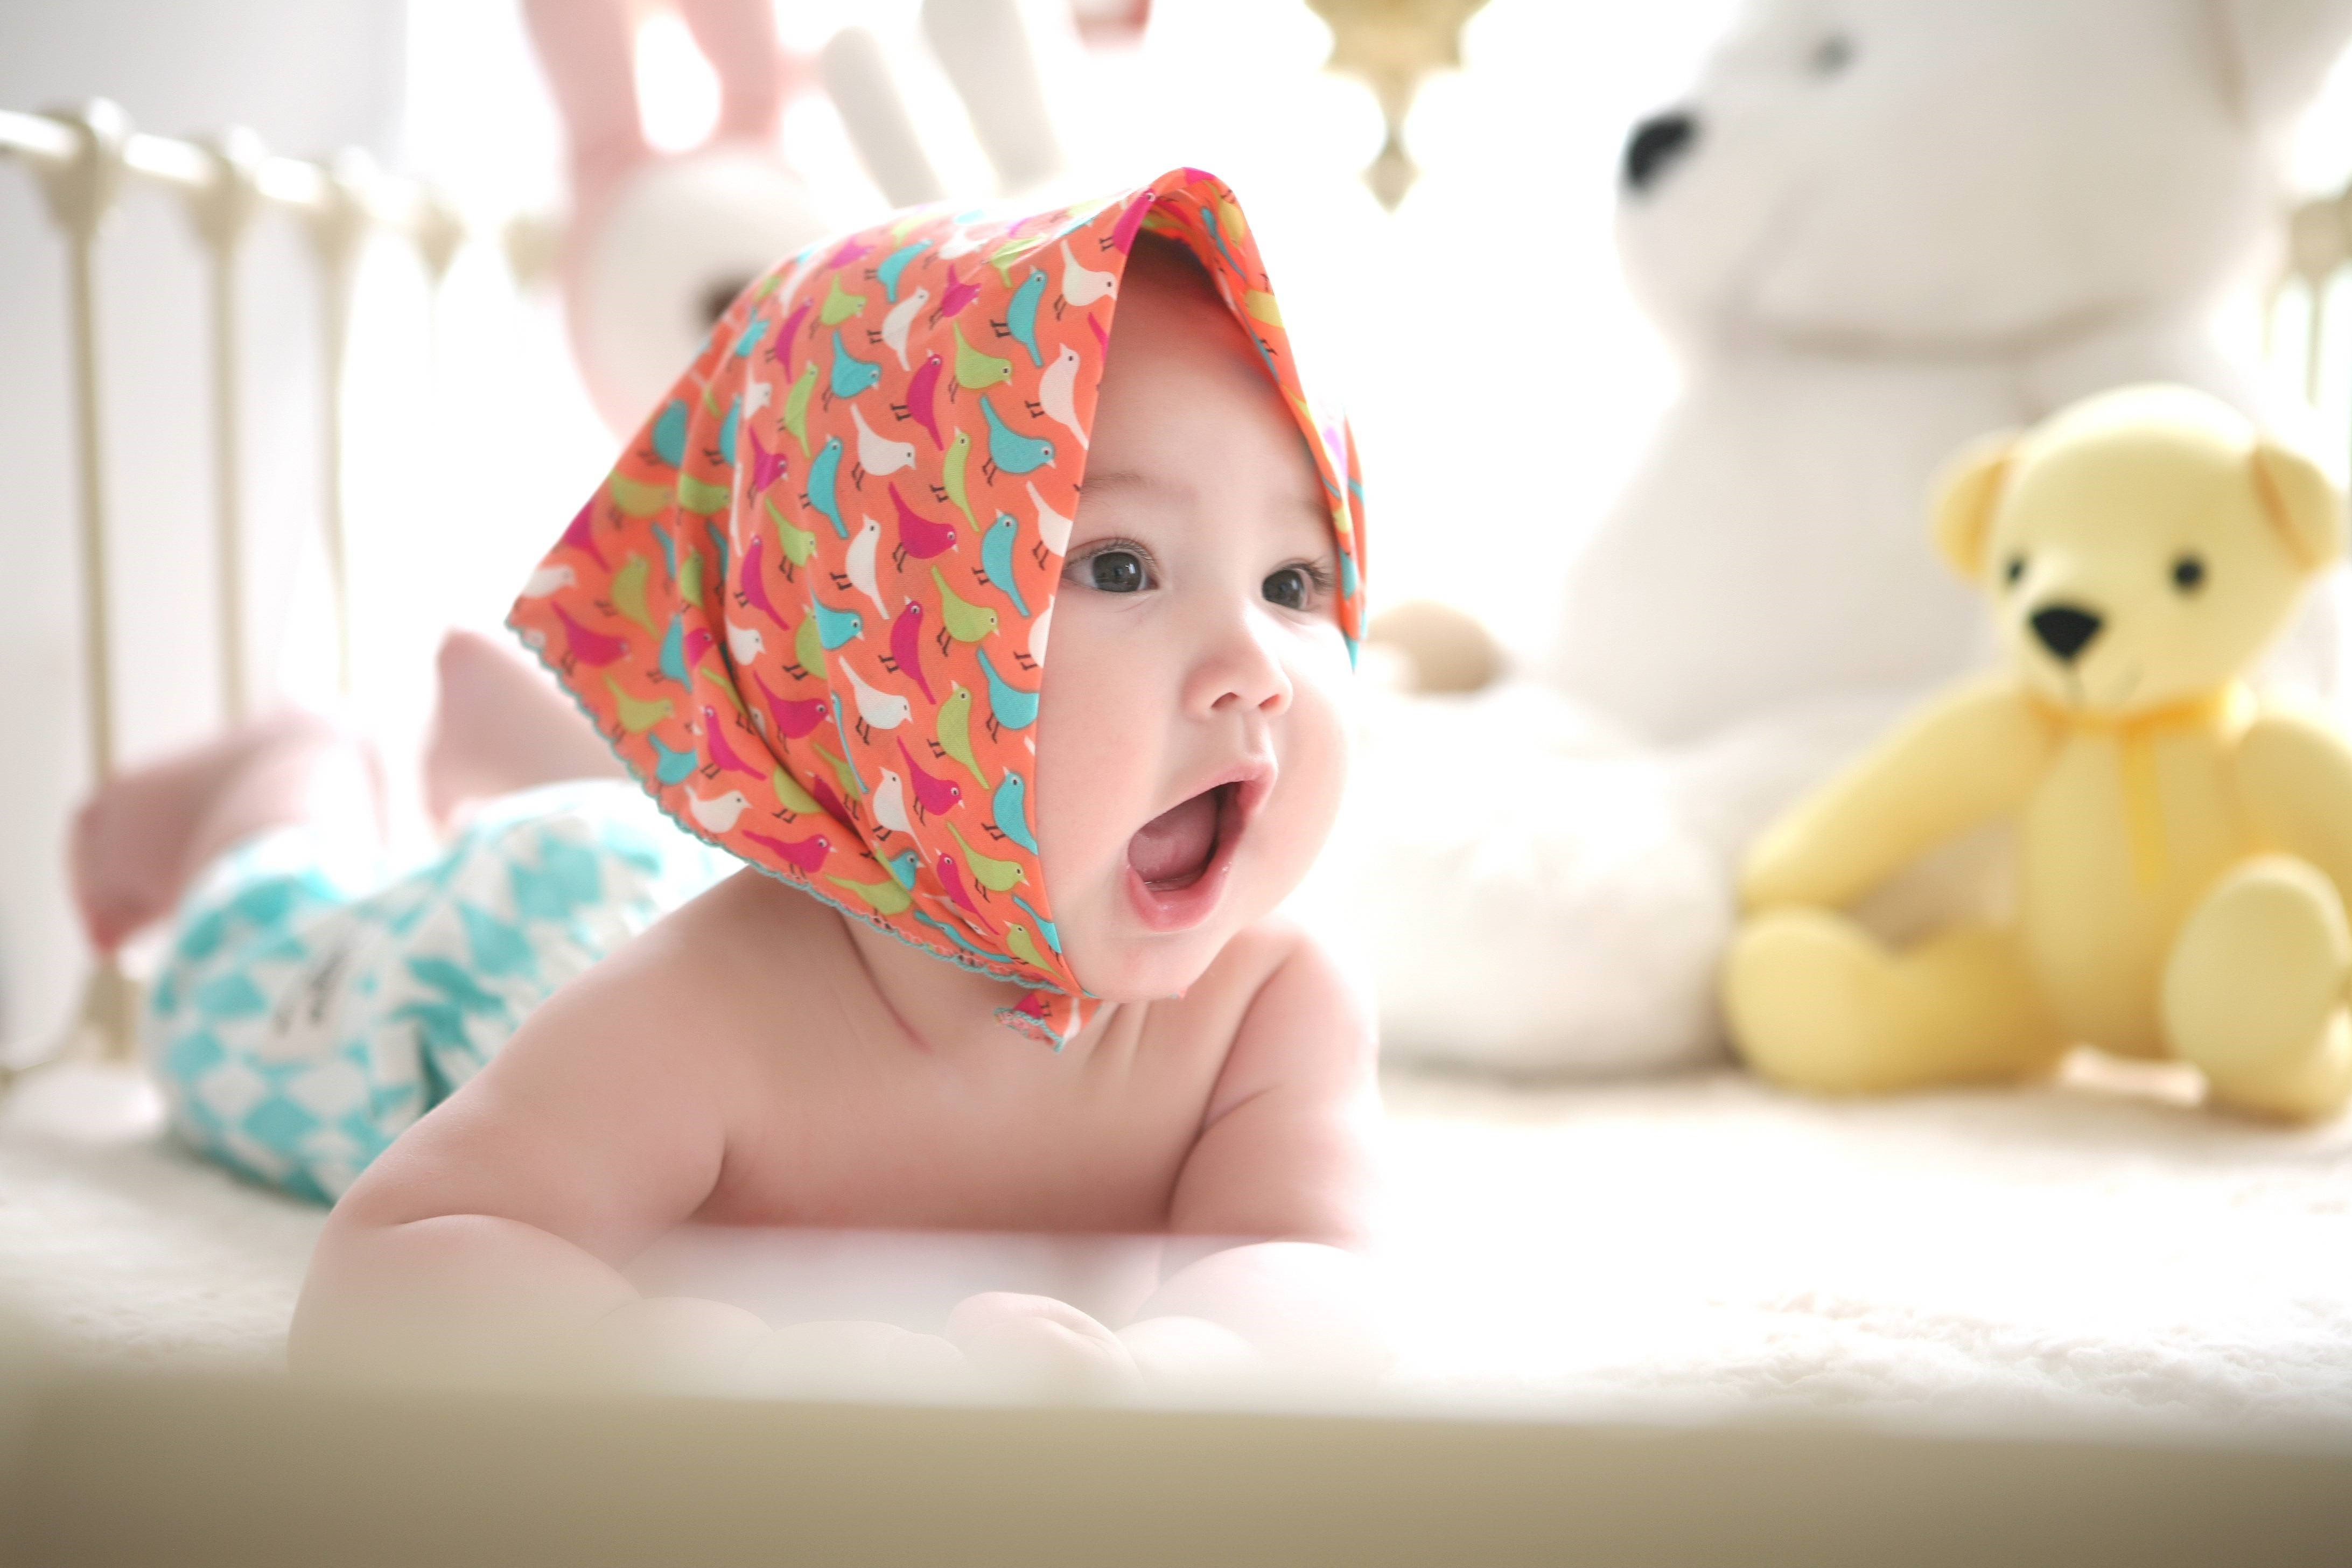 Adorable Baby Beautiful 265987 , HD Wallpaper & Backgrounds